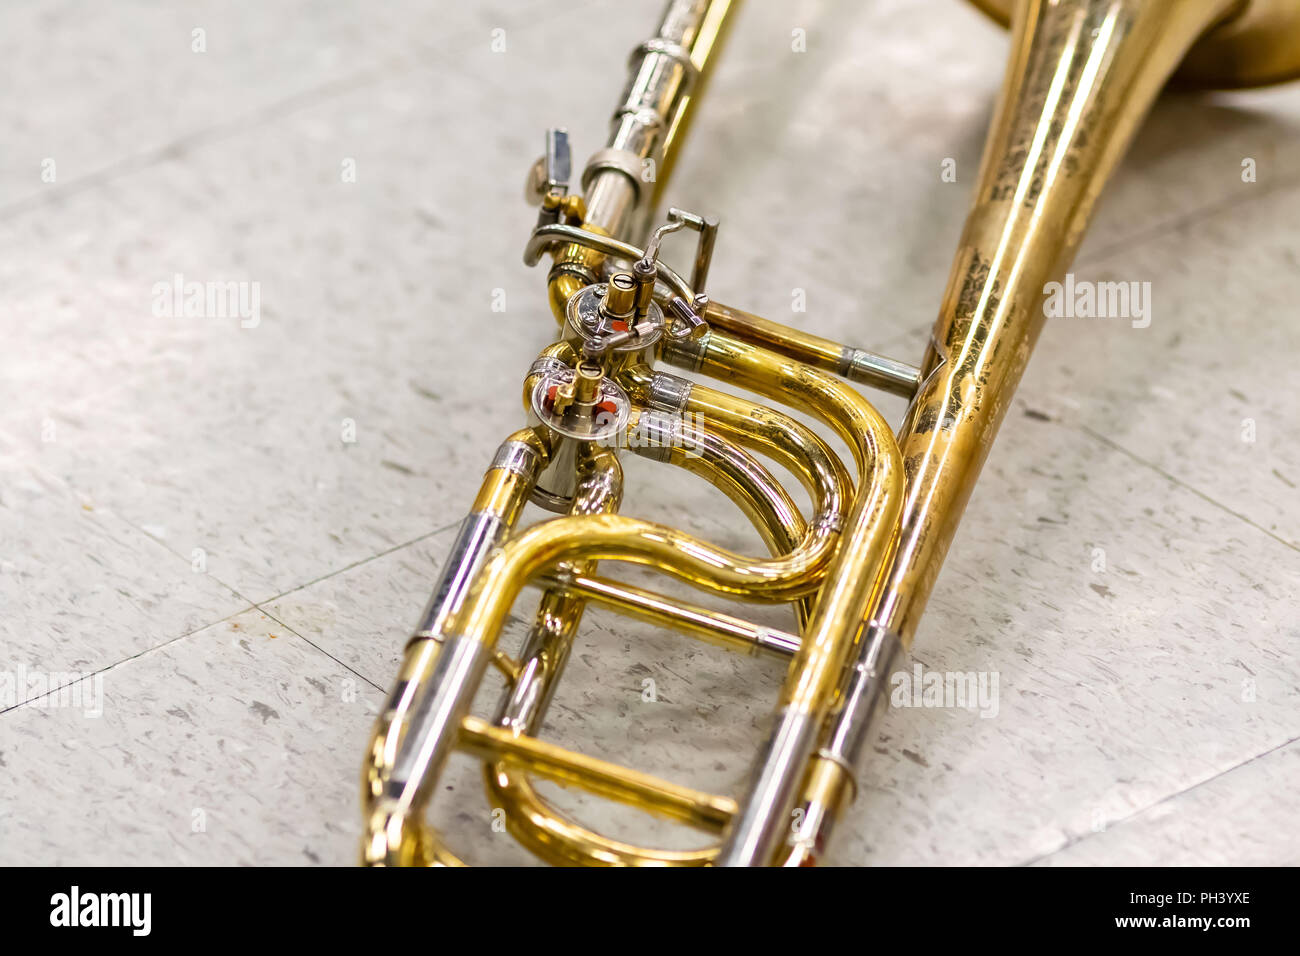 a close up of a well used marching band trombone Stock Photo